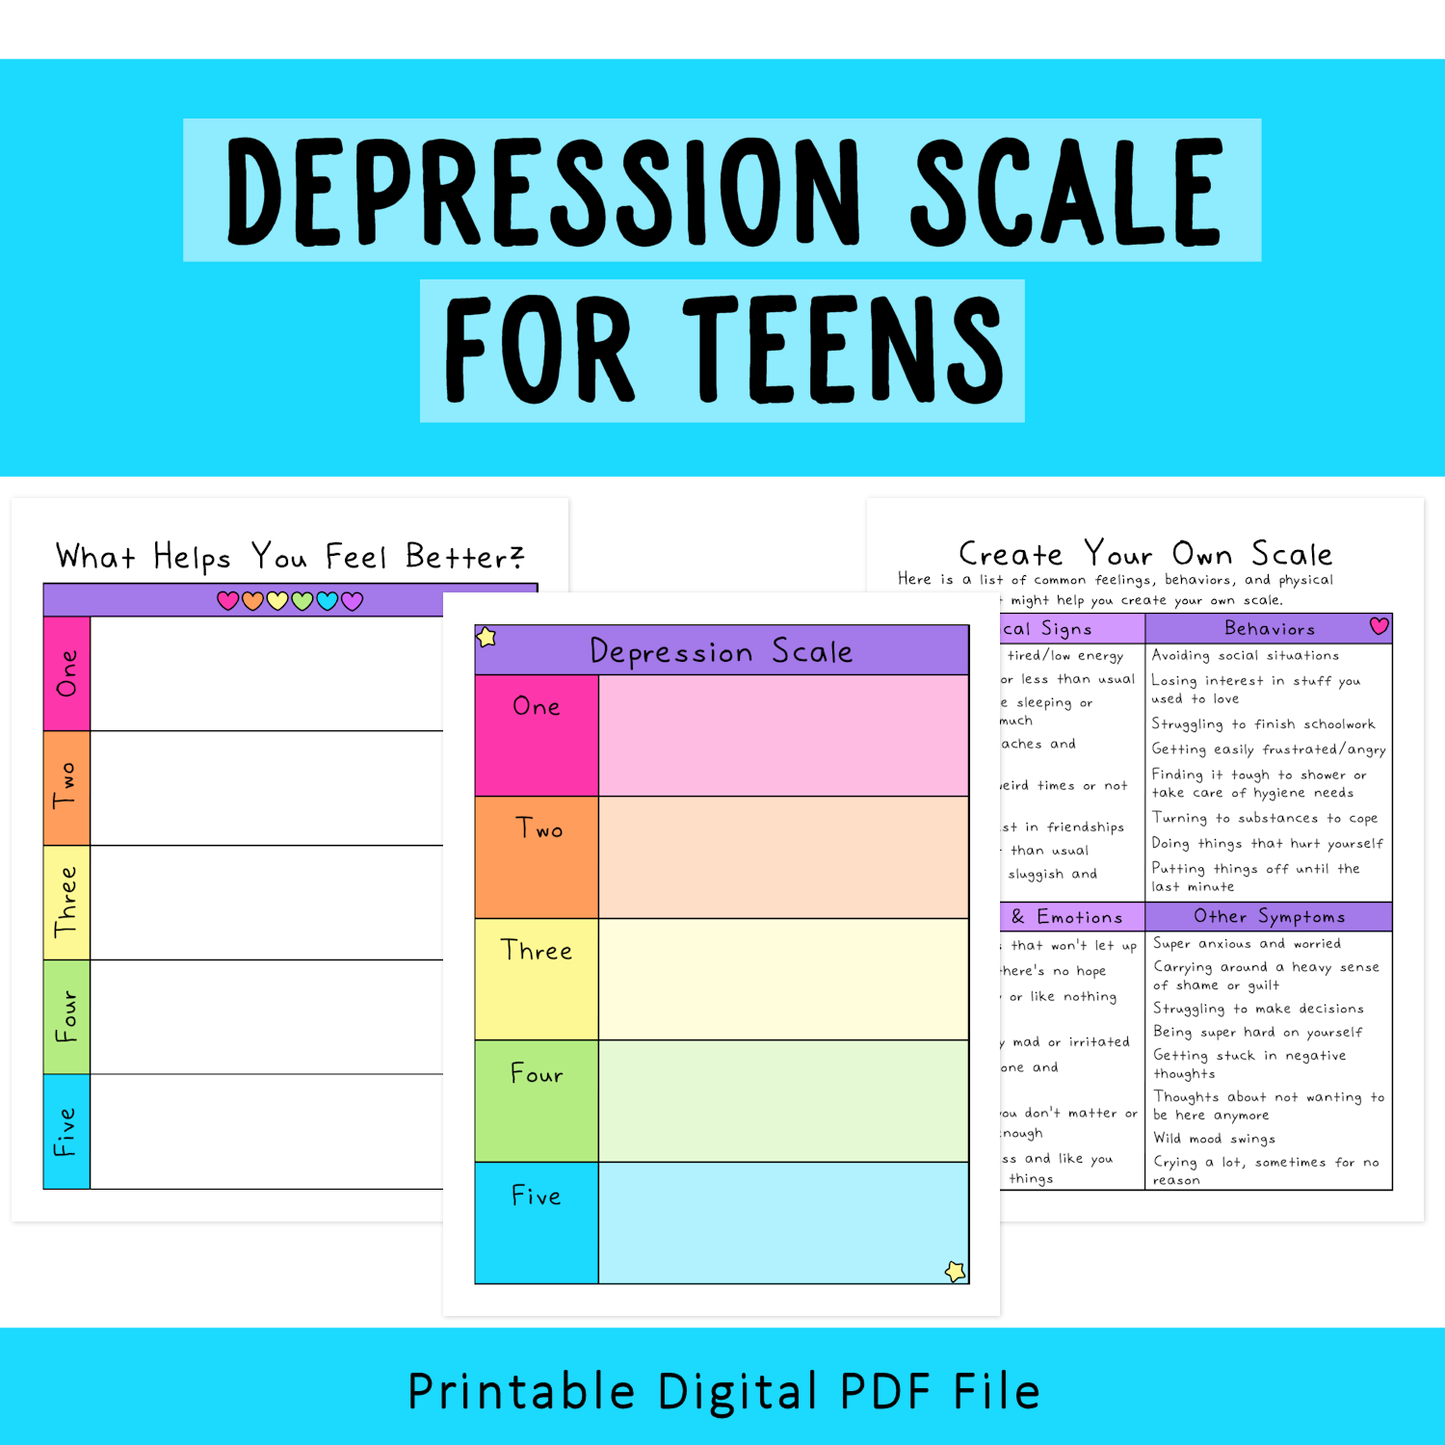 Create Your Own Depression Scale (Teens)